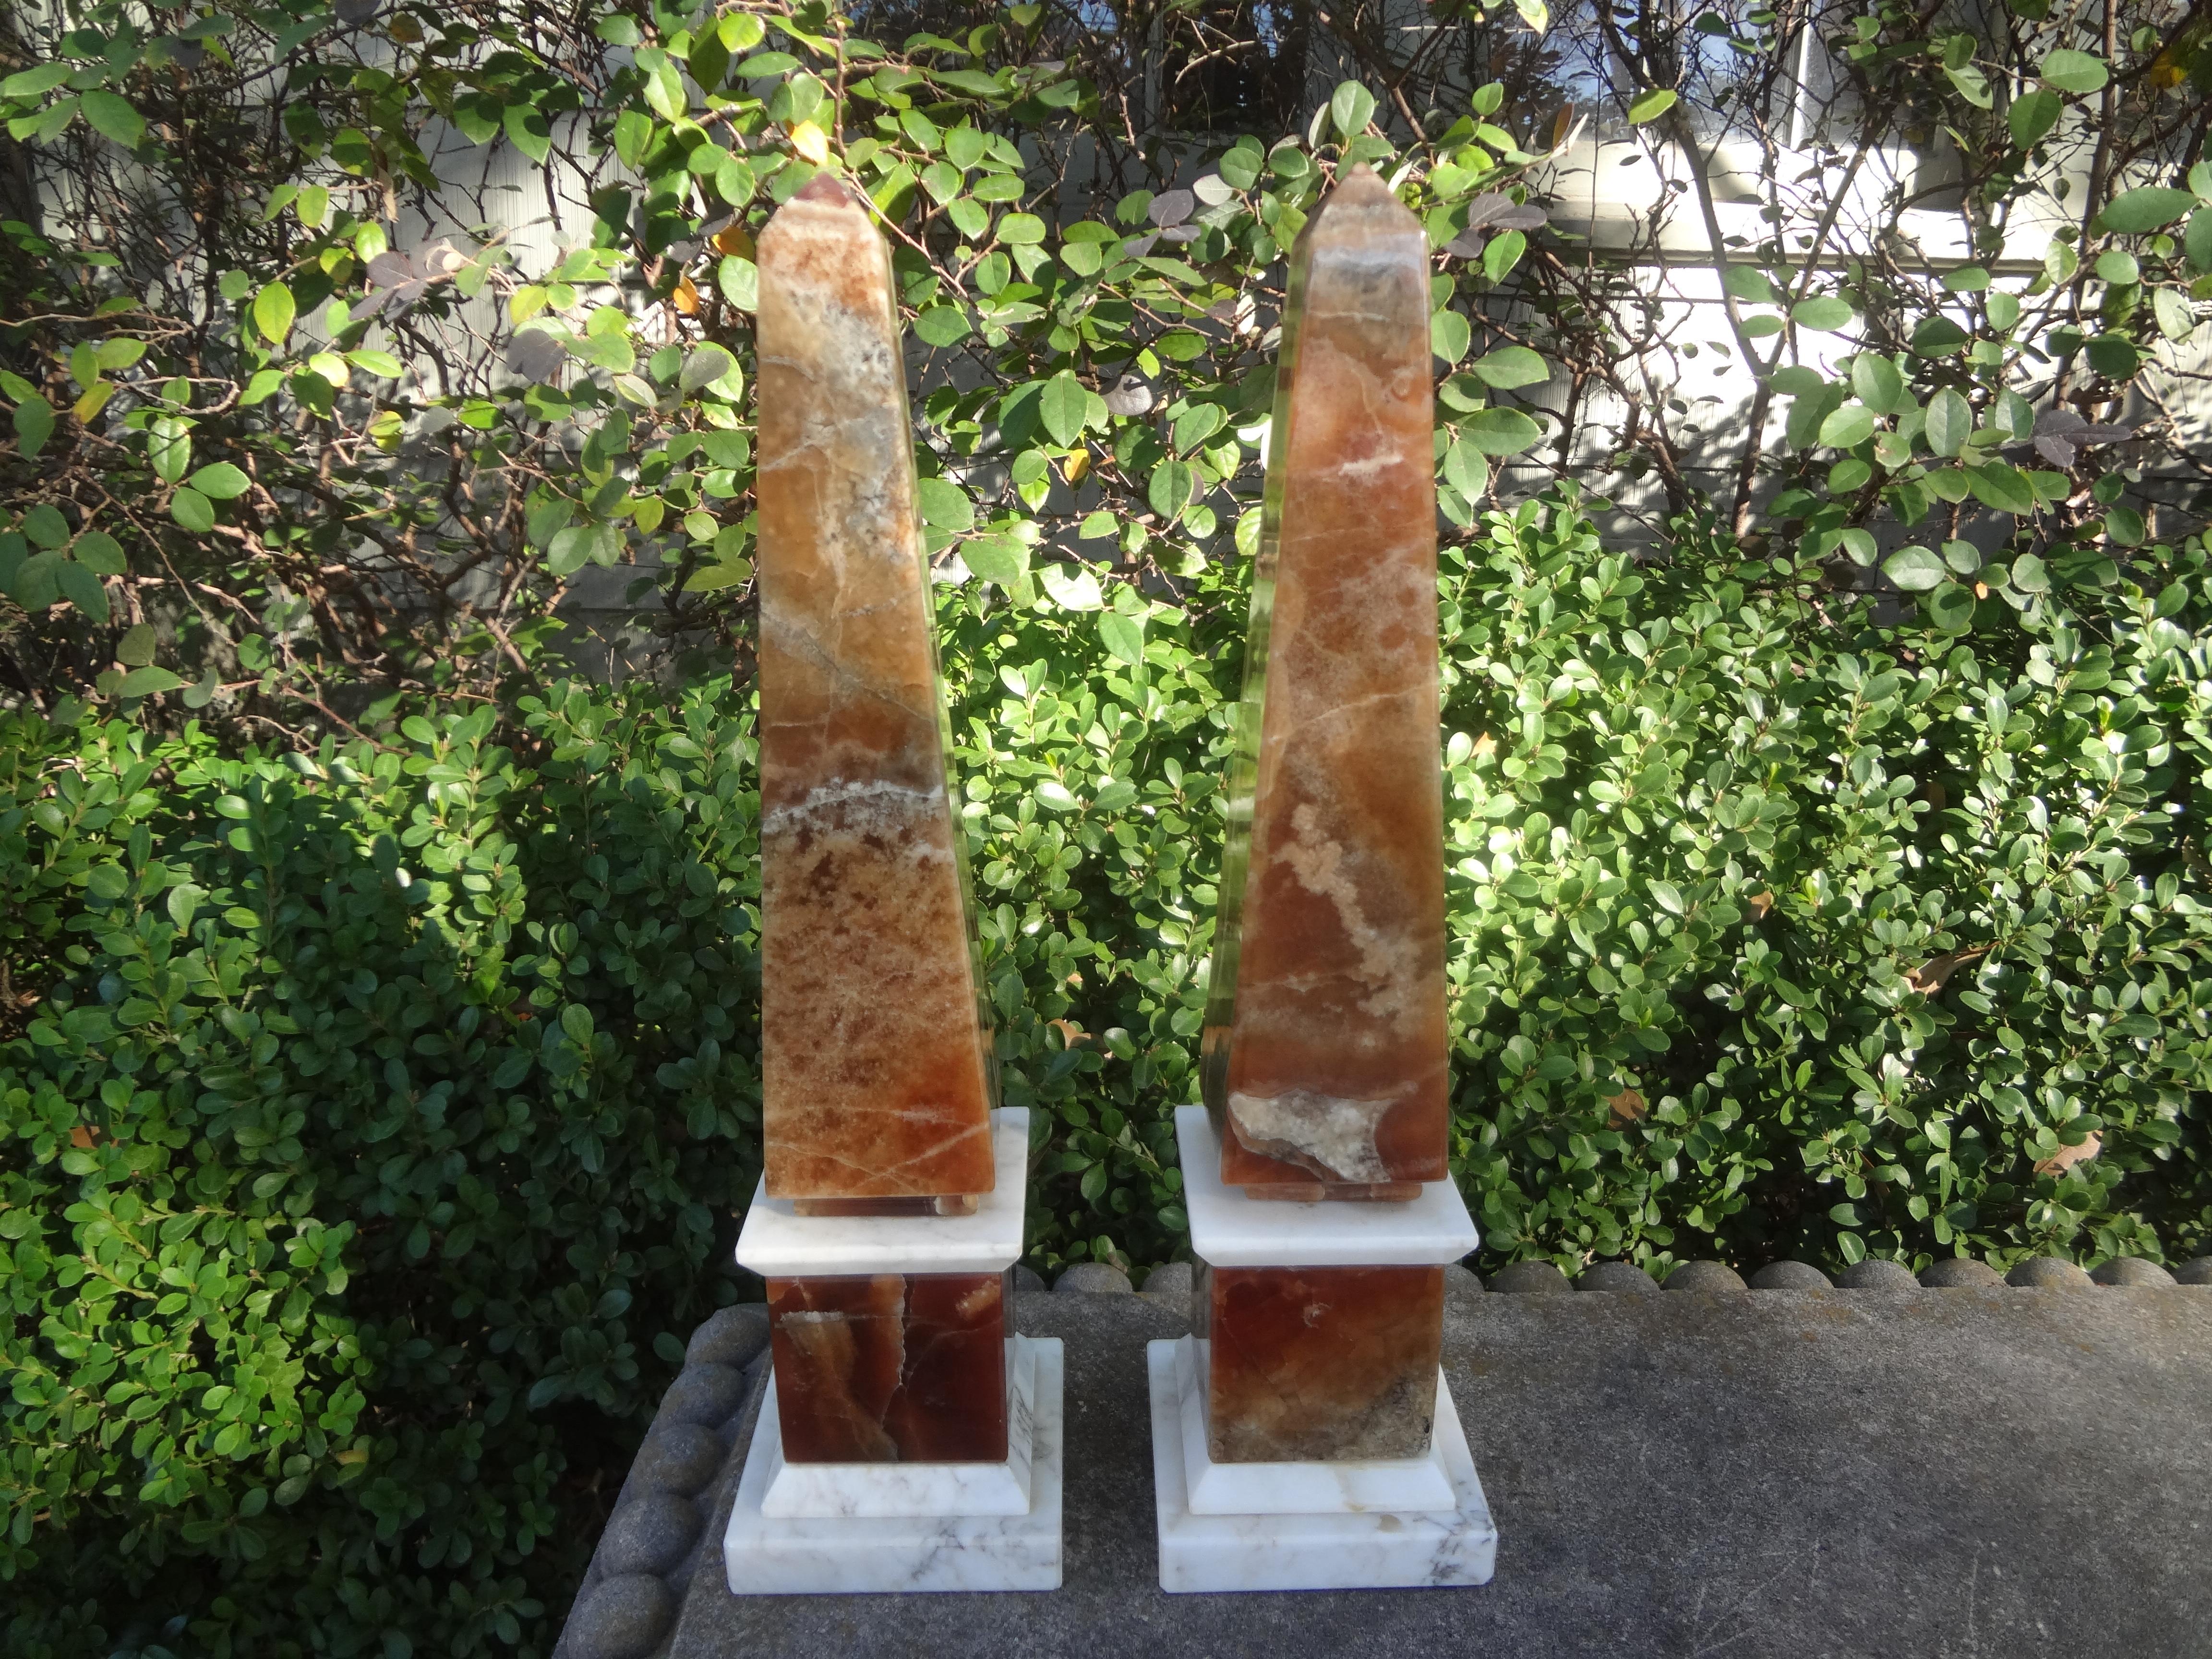 Pair Of Vintage Italian Marble Obelisks.
Stunning pair of Italian Neoclassical style obelisks made of an interesting combination of brown and white marble.